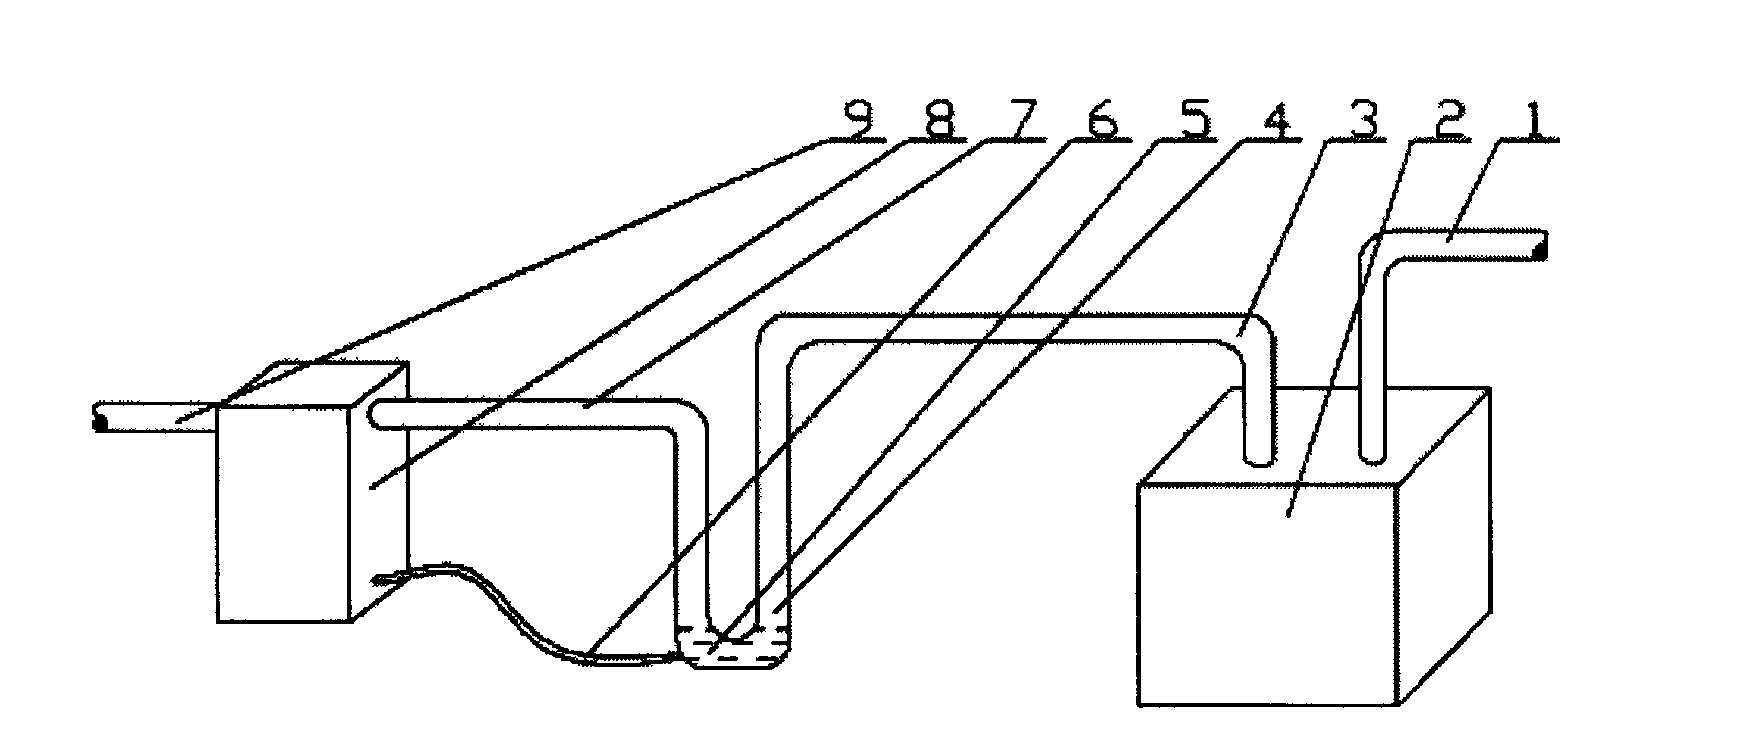 Automatic oil return device of refrigeration system